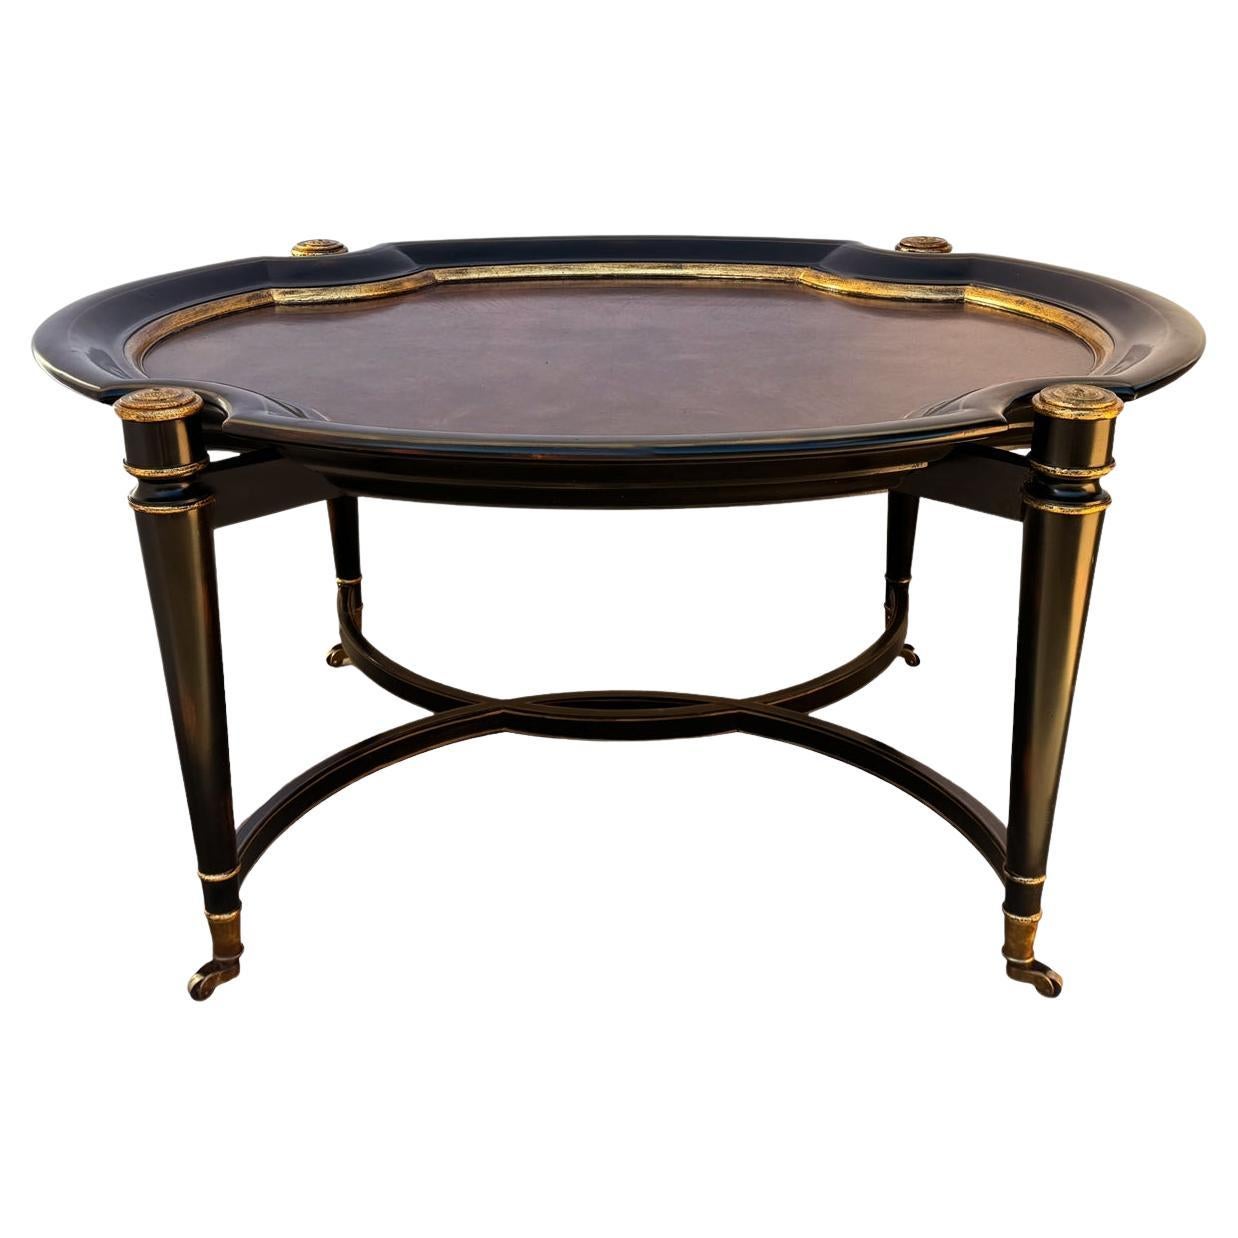 Hollywood Regency Burl Wood with Gold Trim Oval Cocktail Table by Maitland Smith